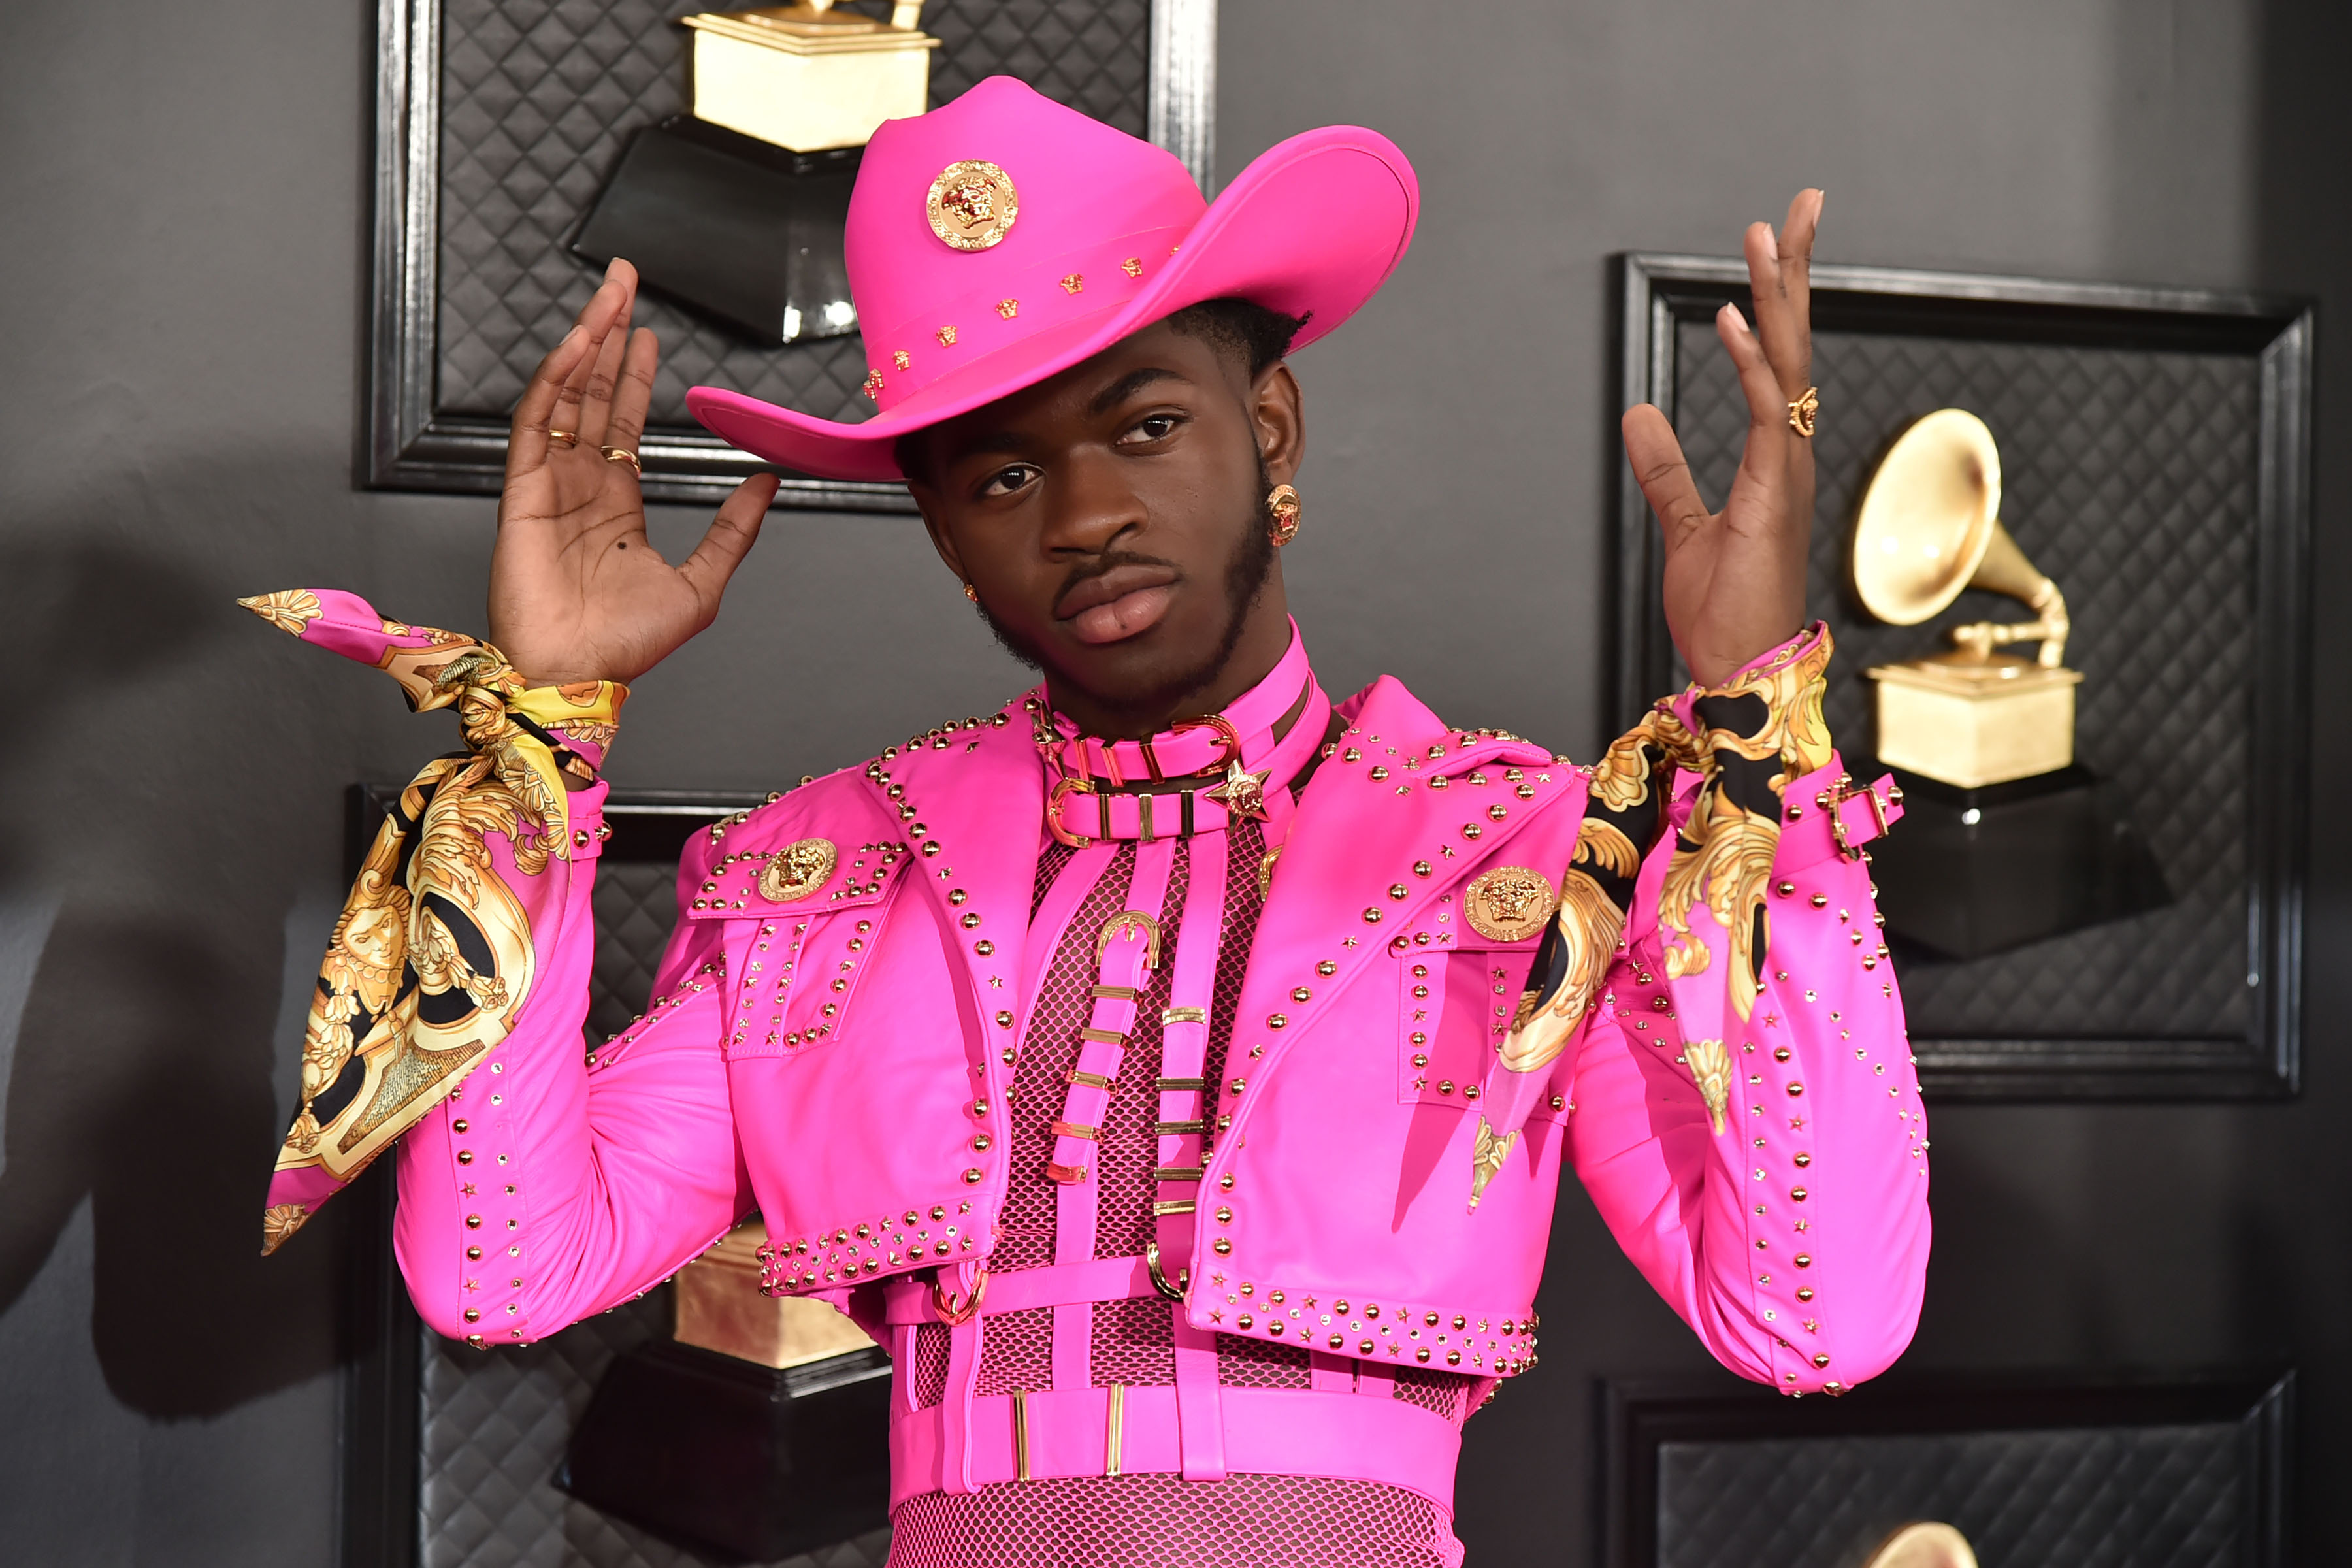 Lil Nas X at the 2020 Grammys in Versace.